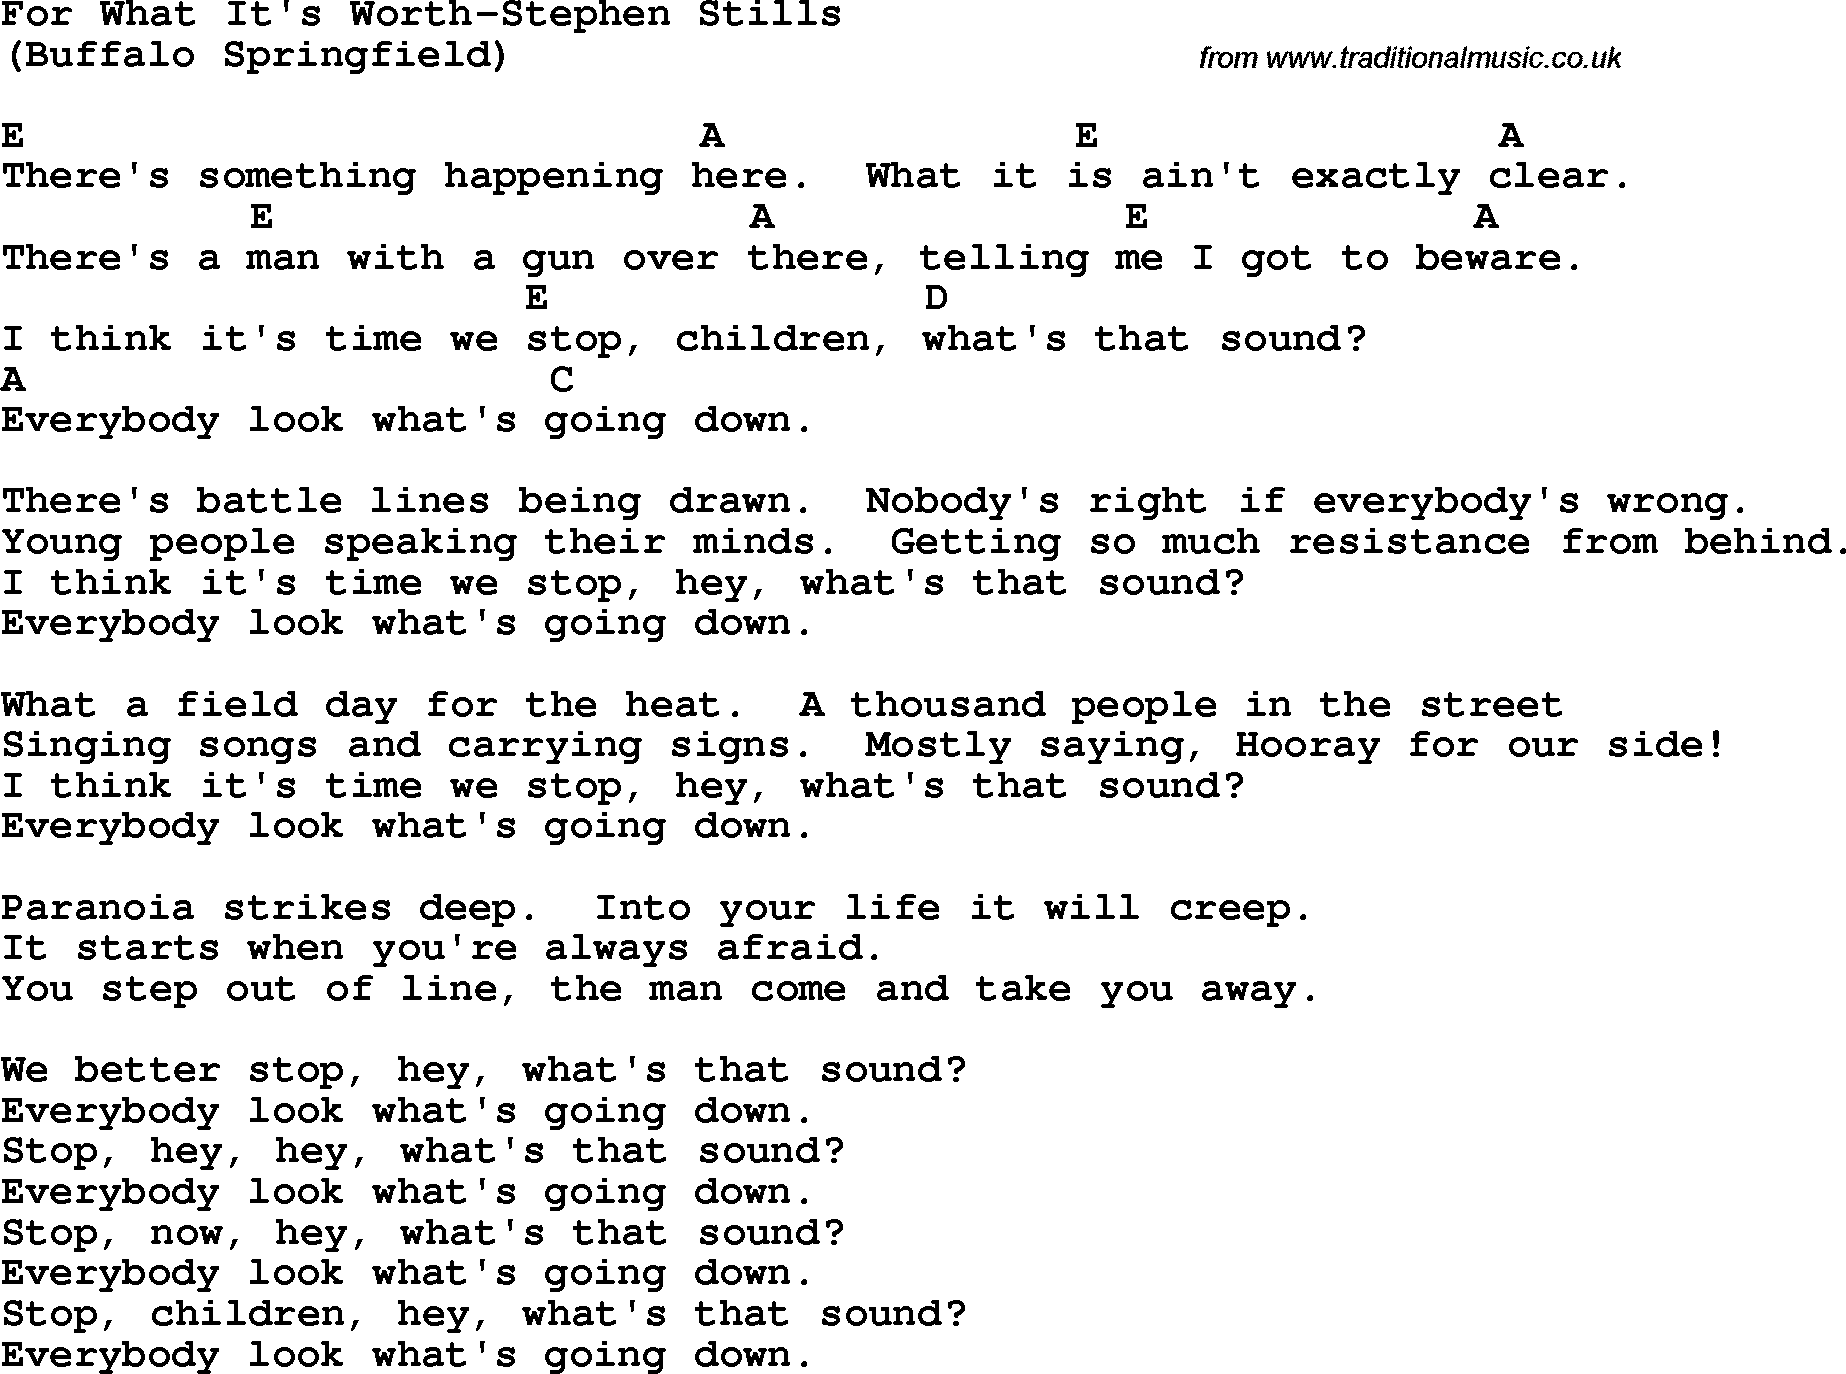 Protest Song For What It's Worth-Stephen Stills lyrics and chords